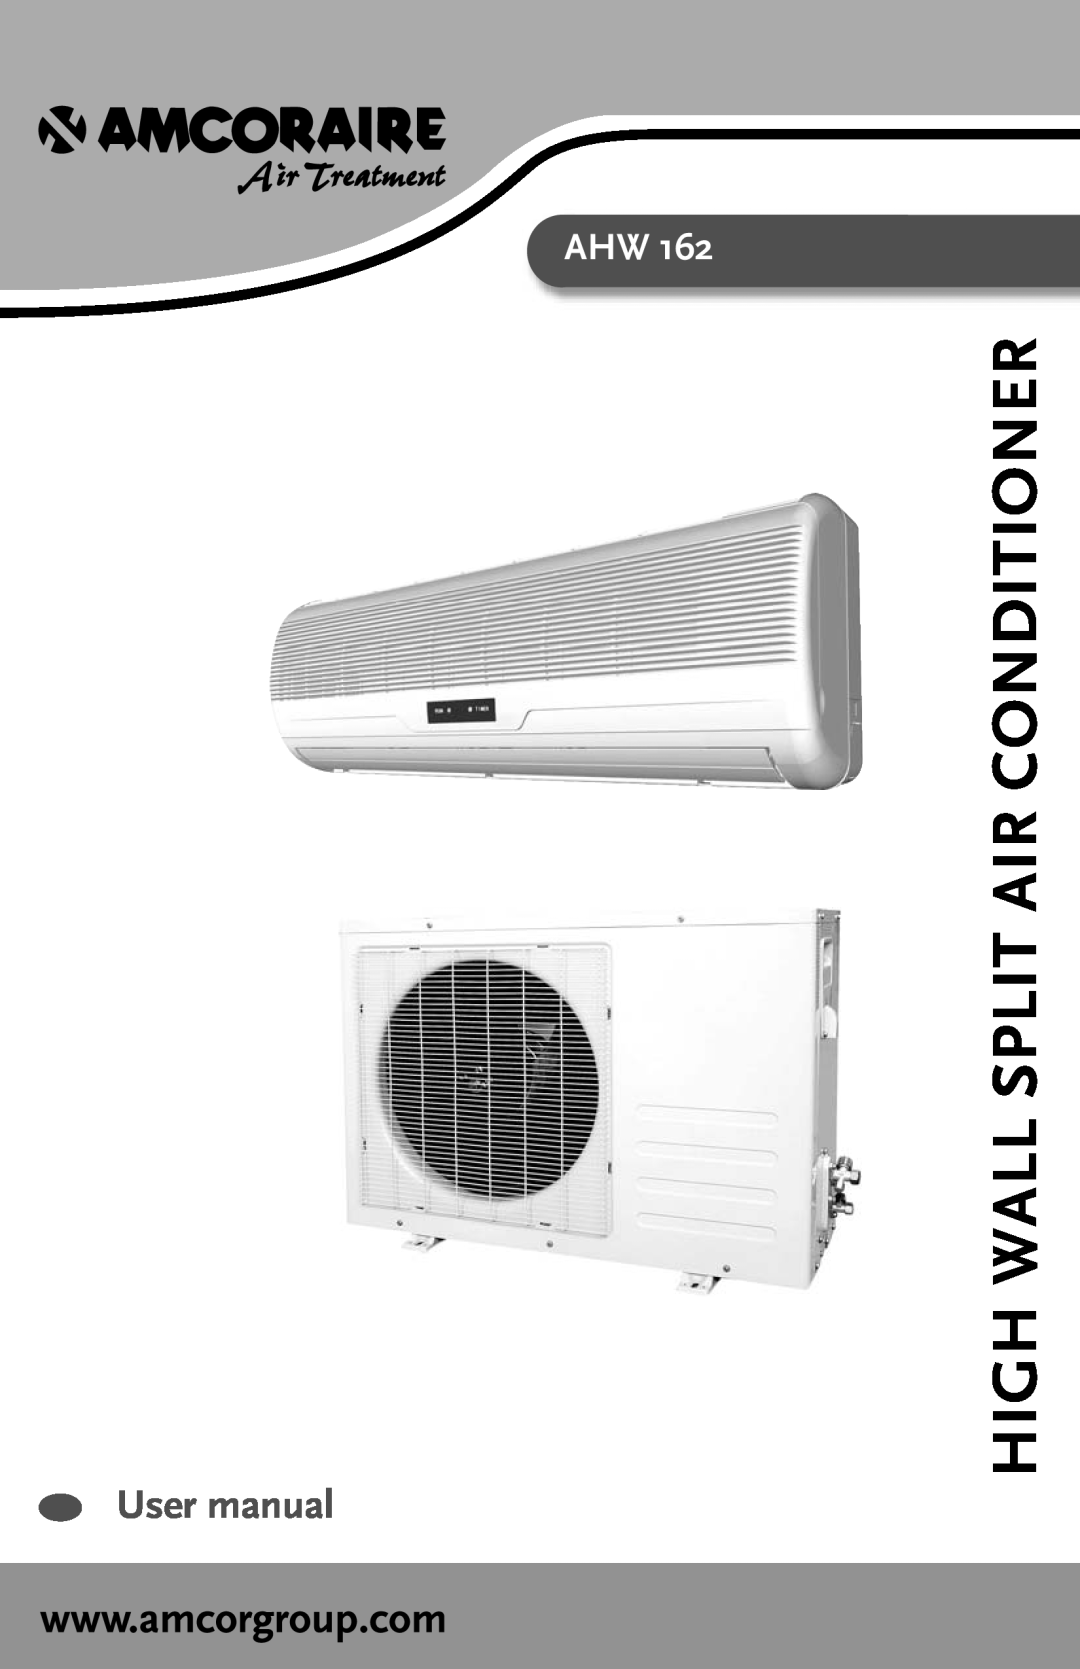 Amcor AHW 162 user manual High Wall Split Air Conditioner 